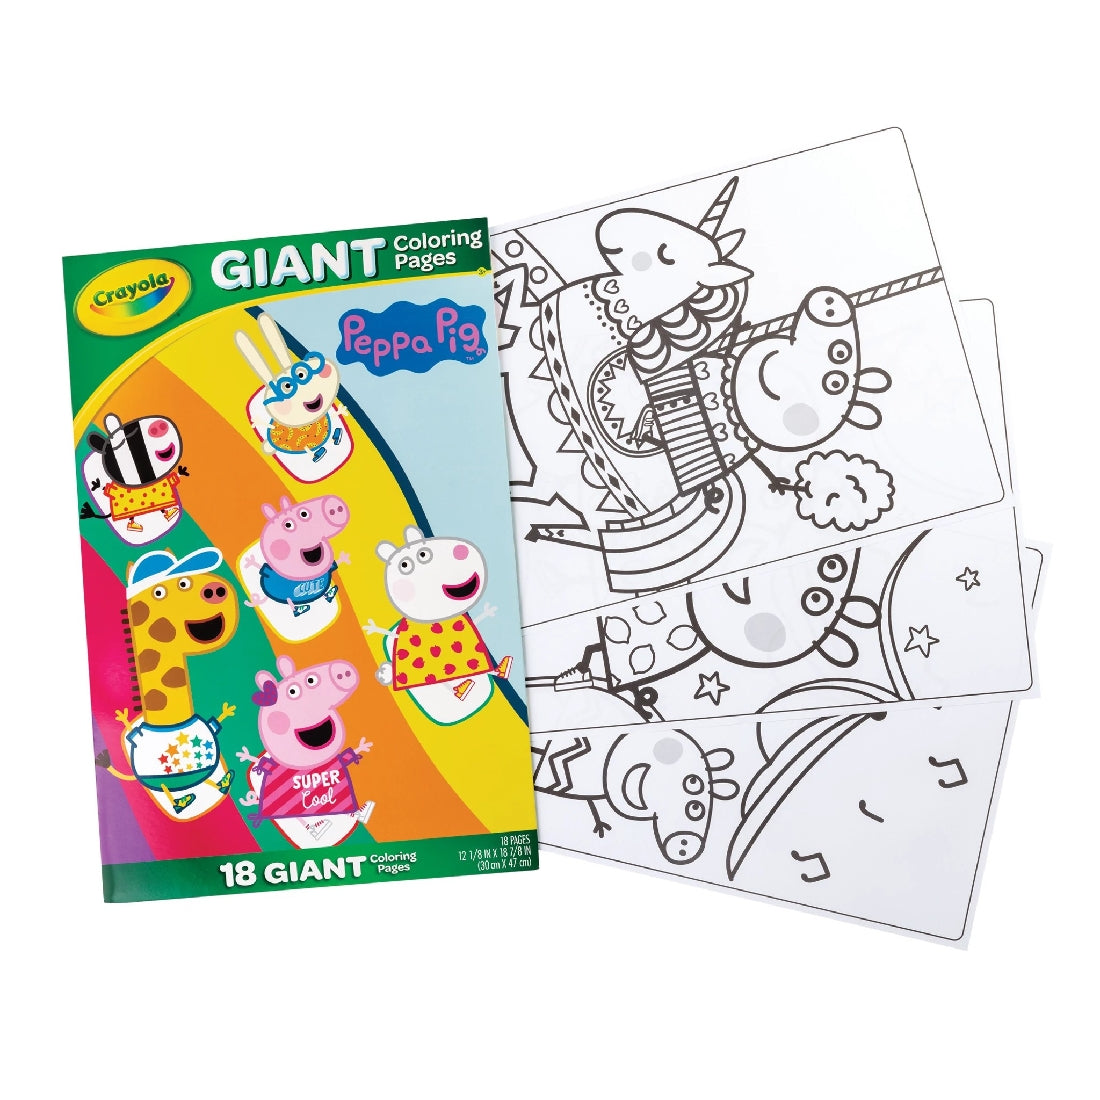 CRAYOLA GIANT COLOURING PAGES - PEPPA PIG